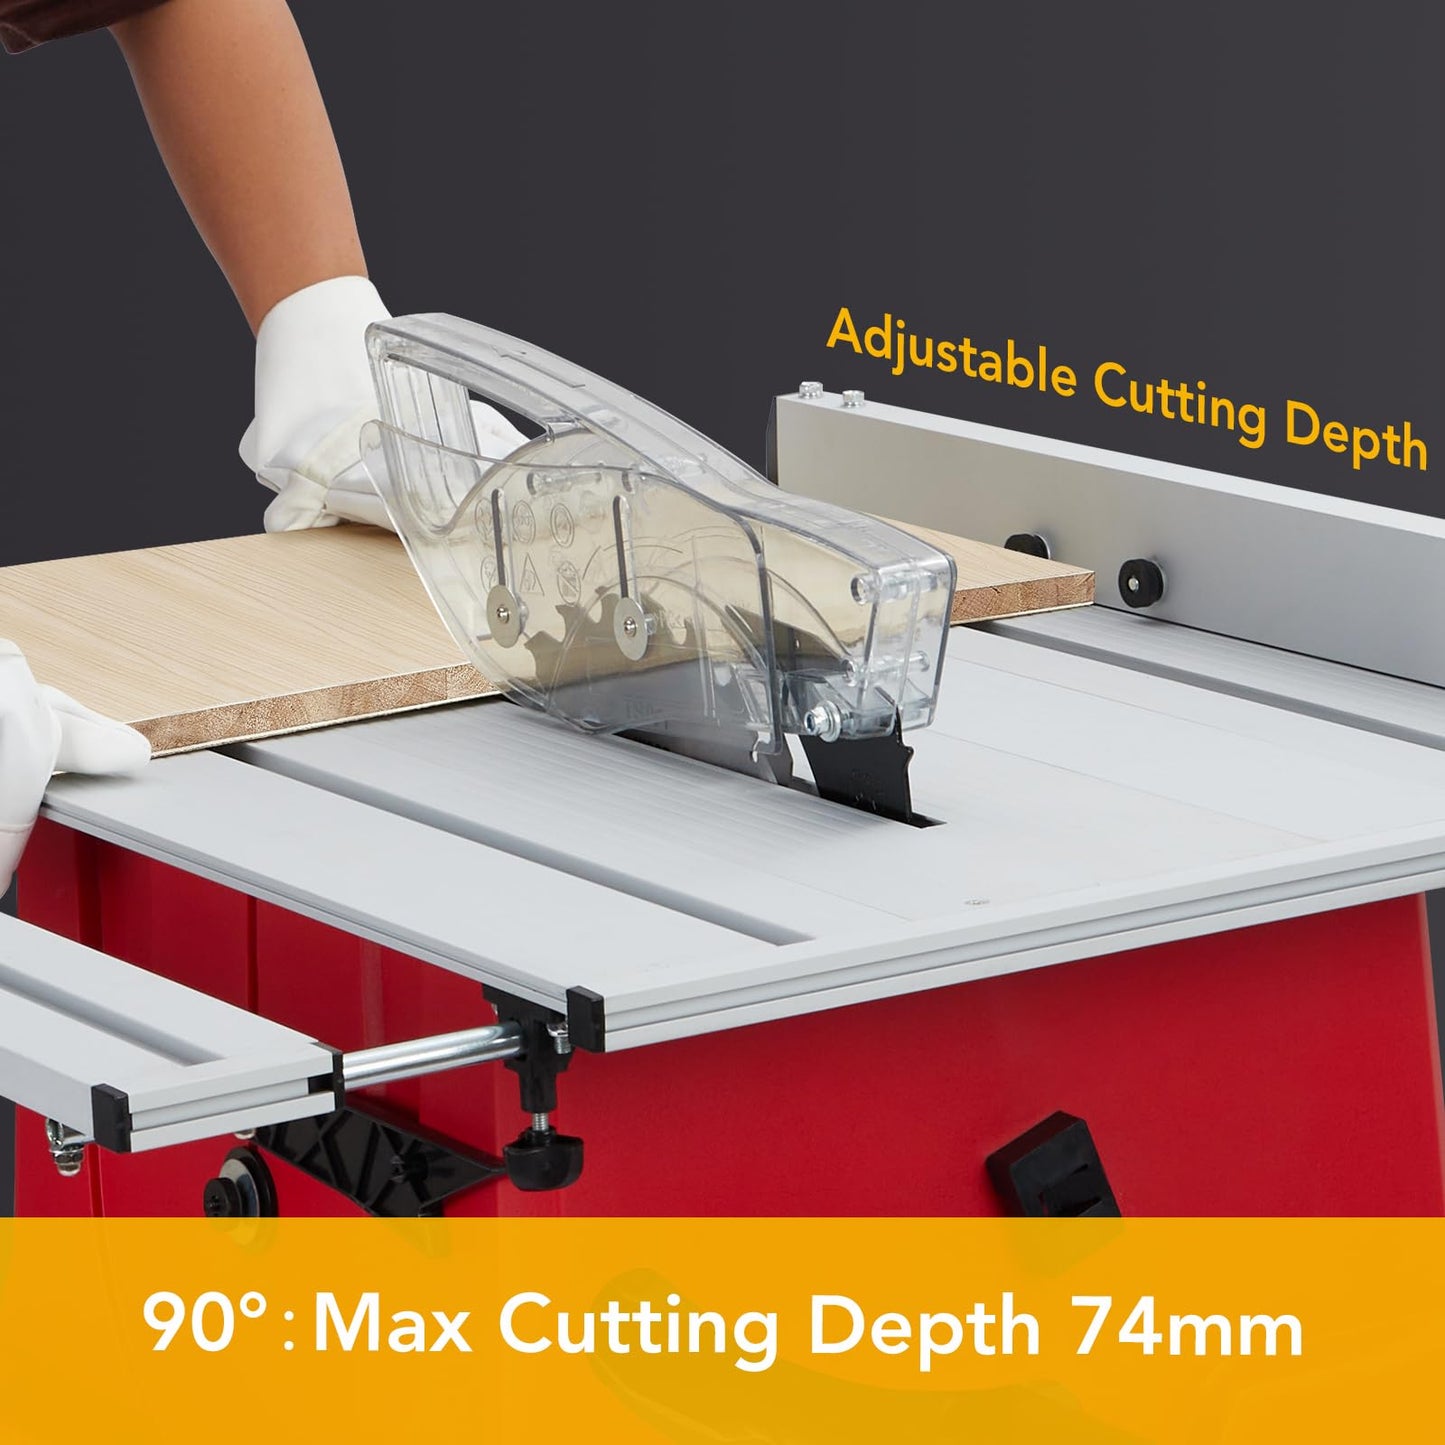 Table Saw, Broadfashion 10 Inch 15A Multifunctional Saw with Stand & Push Stick, 90° Cross Cut & 0-45° Bevel Cut, 5000RPM, Adjustable Blade Height